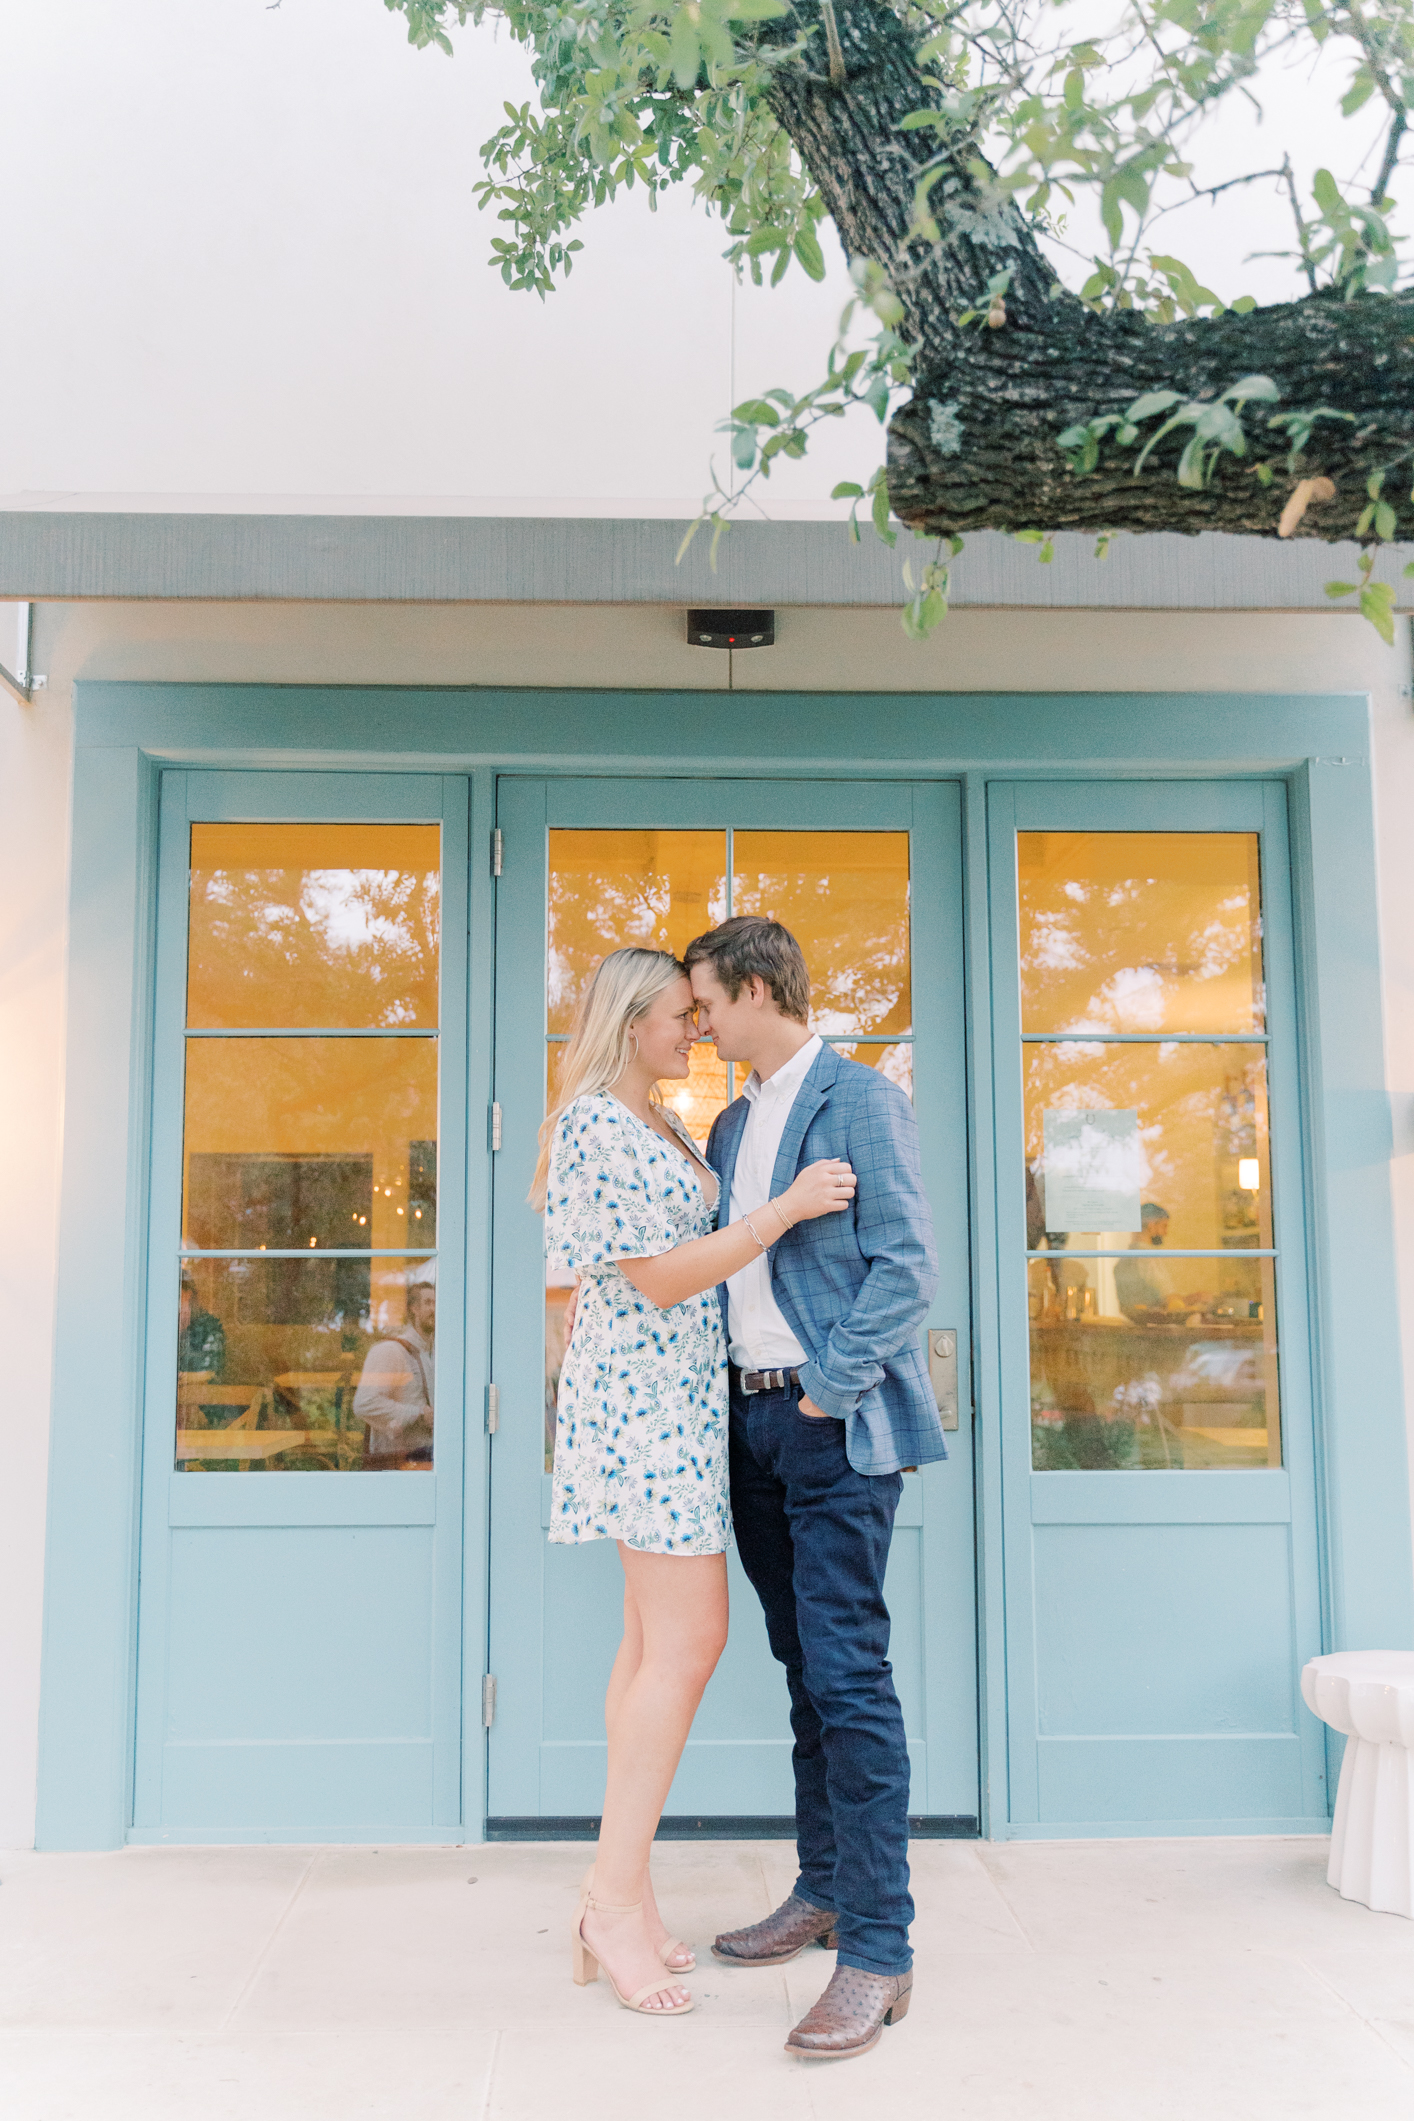 If you're looking for an adorable lifestyle engagement session in ATX, look no further!!! The Wayback cafe and cottages is an adorable venue out in Bee Caves, TX near Austin. We have the most fun engagement session here!